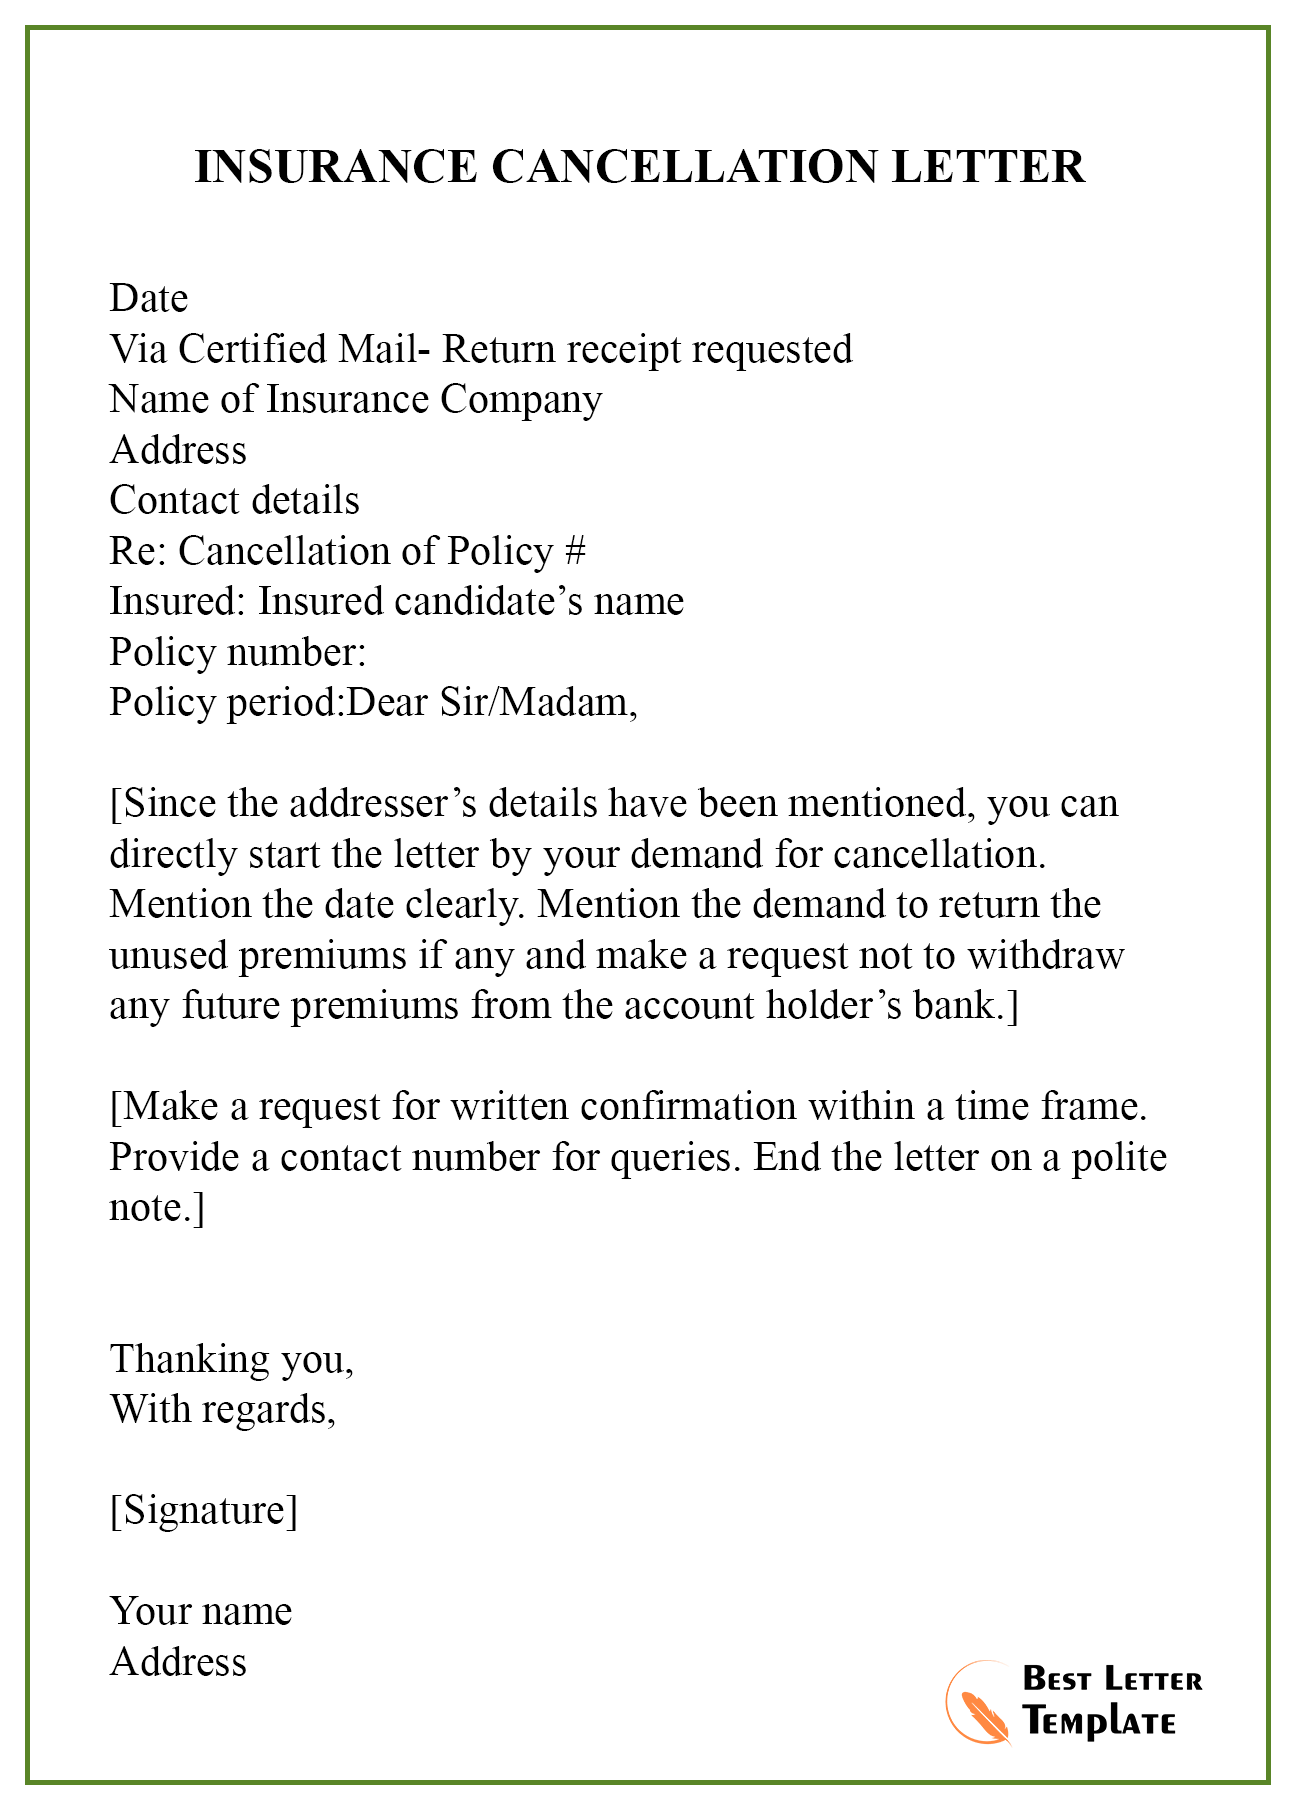 Restaurant Cancellation Policy Template